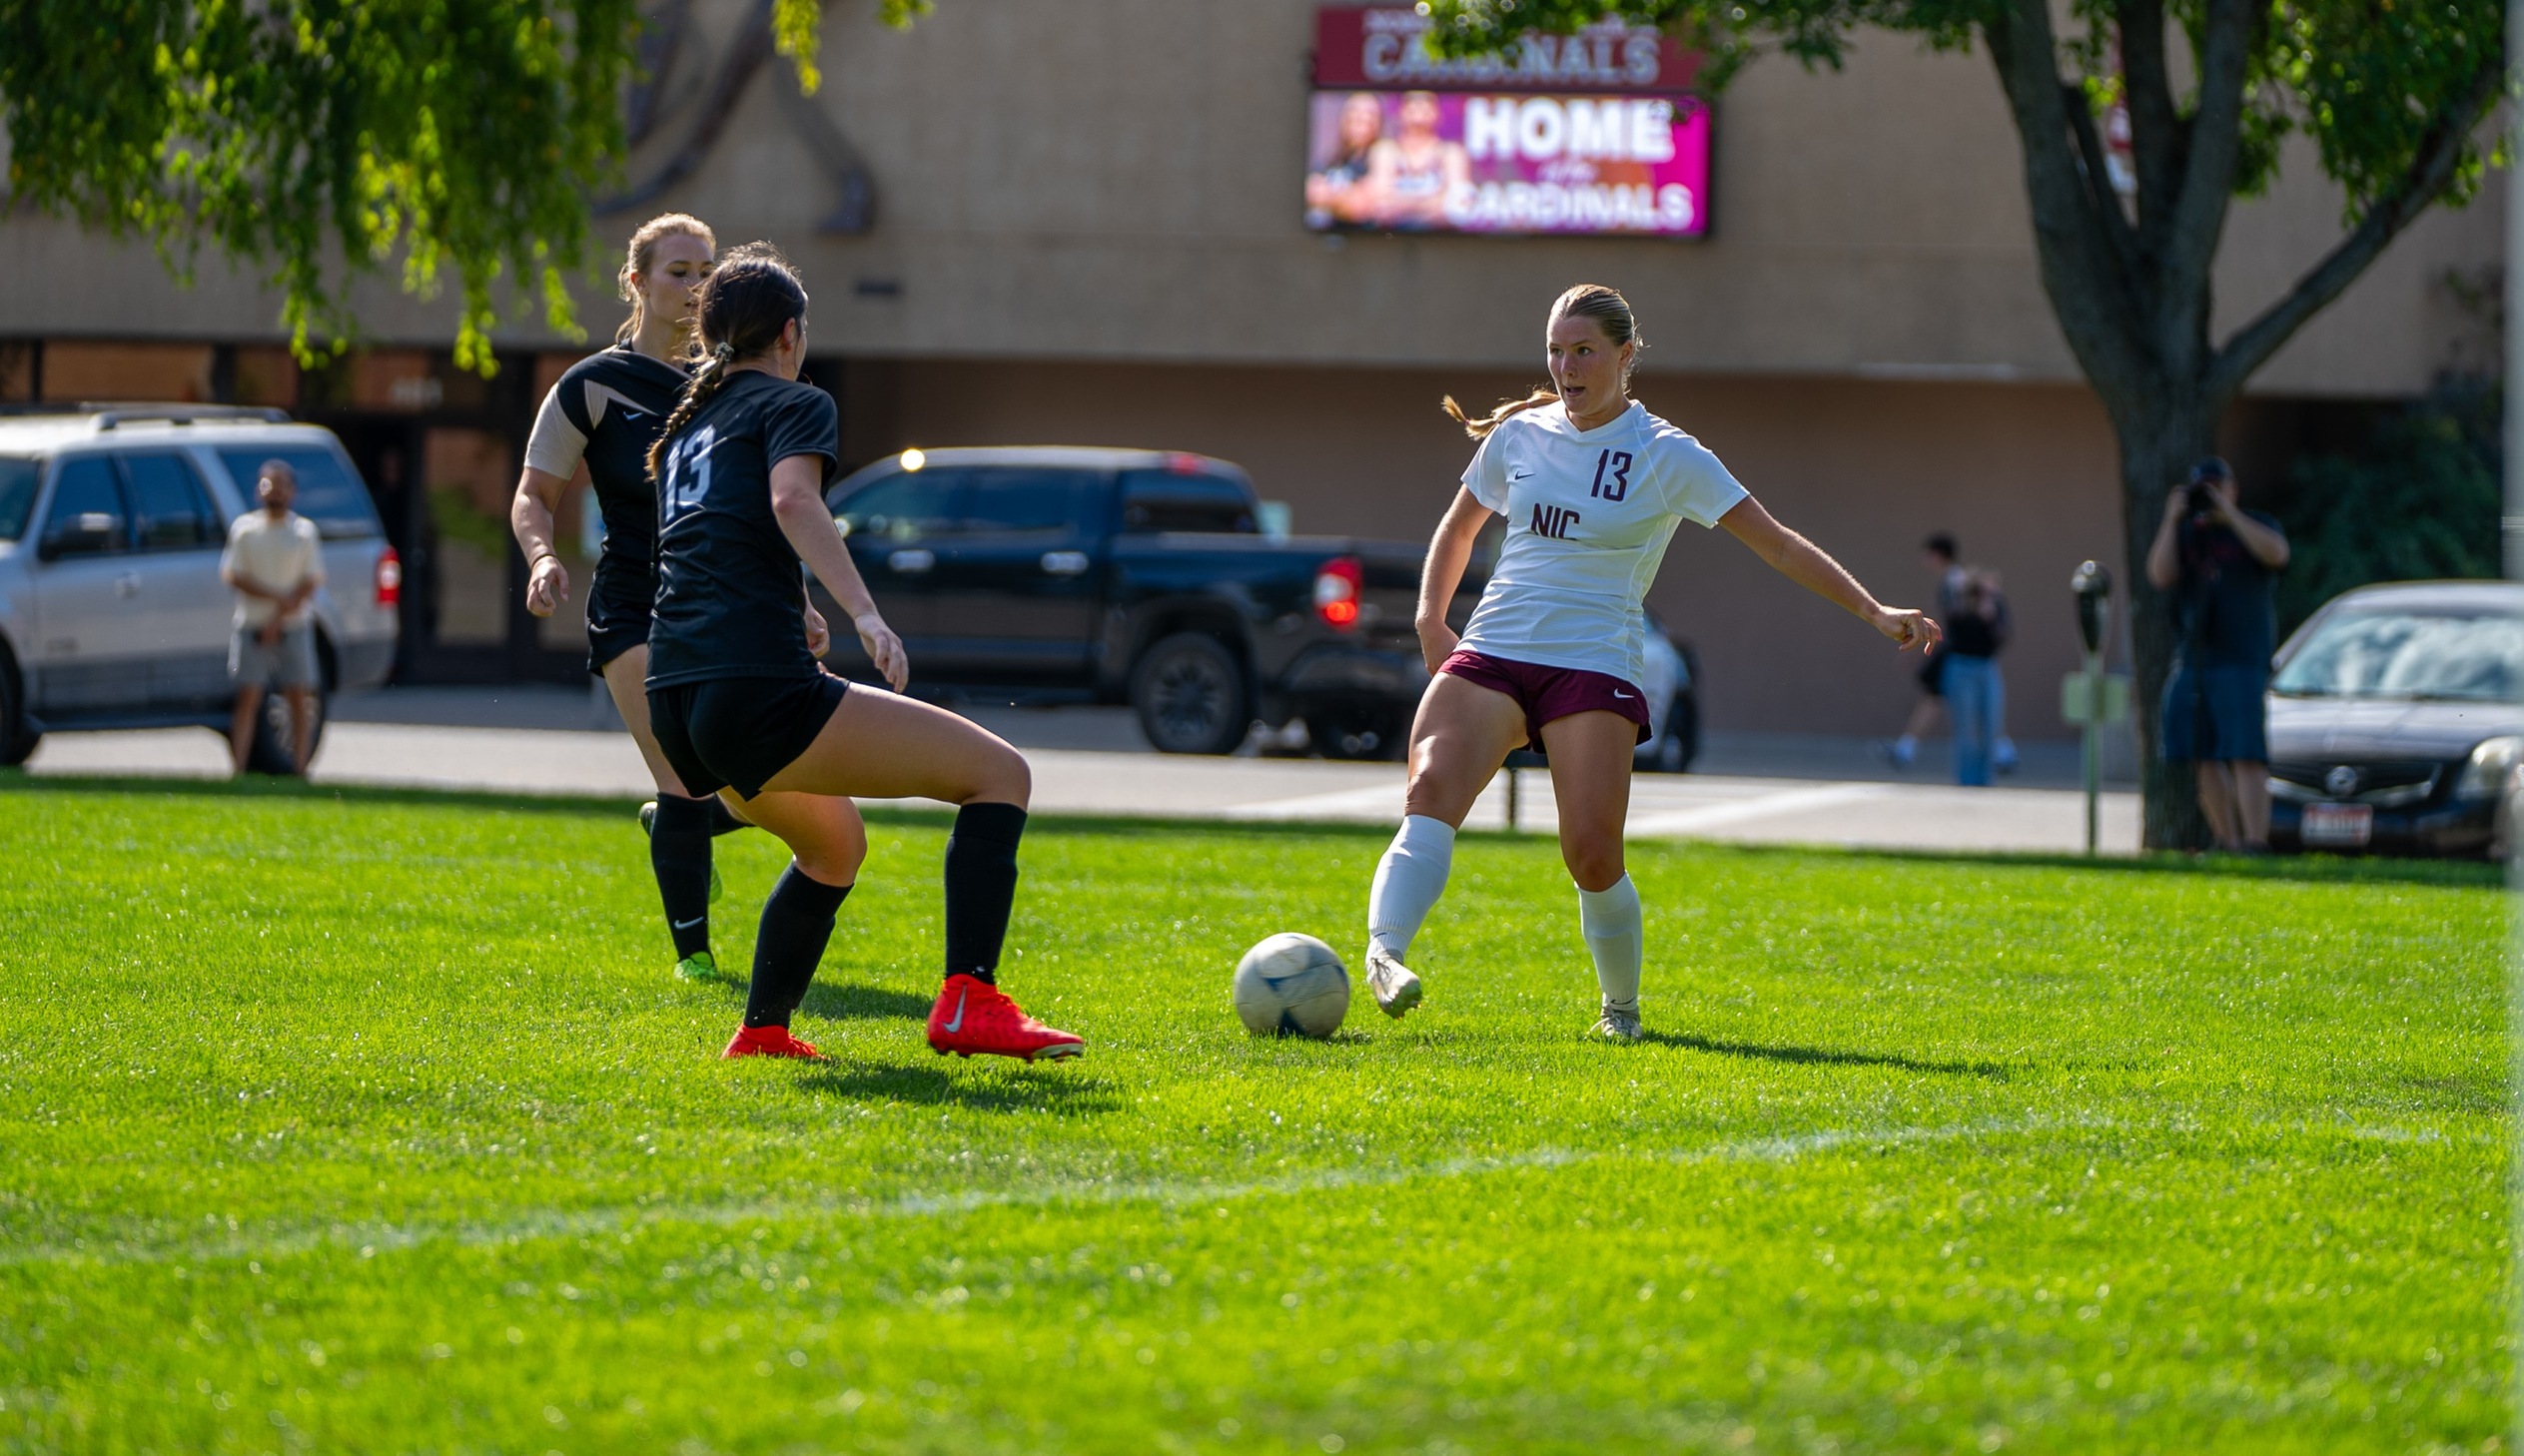 Adison Stoddard approaches defender for WVC.